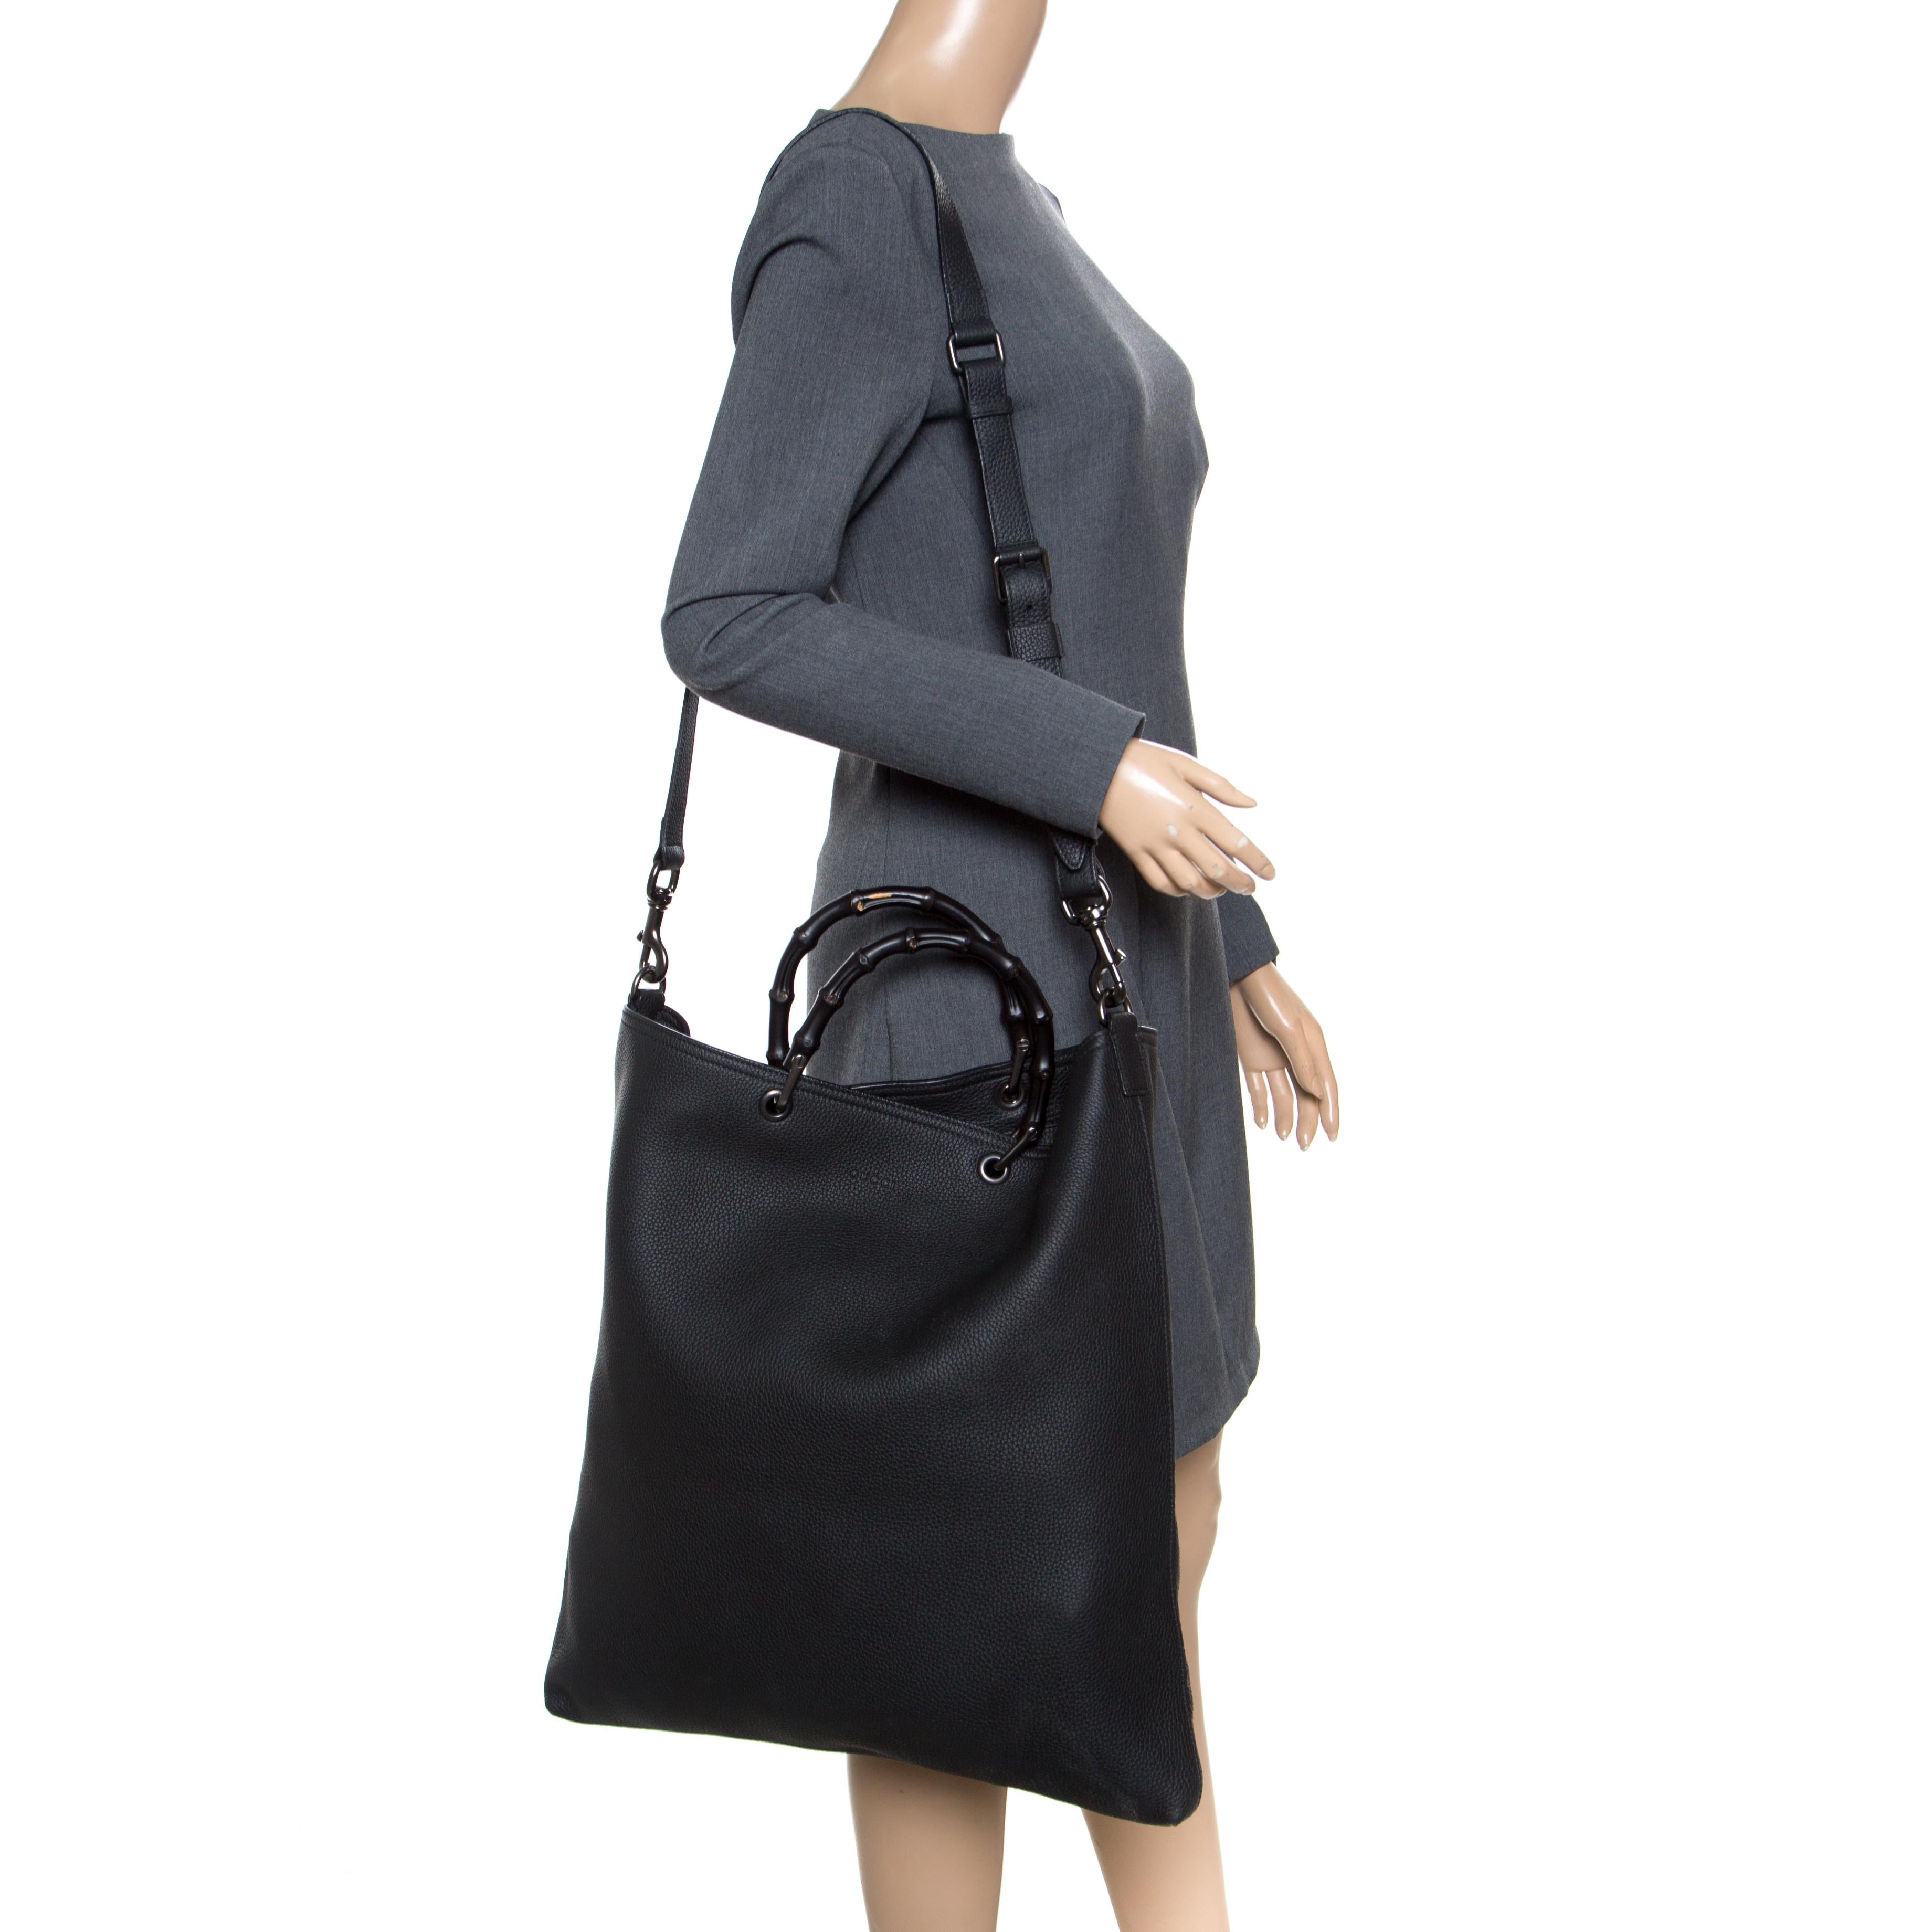 Handbags as fabulous as this one are hard to come by. Crafted from black leather, this stunning number features two bamboo handles and a detachable shoulder strap. The spacious suede interior will safely hold your necessities. The bag is a creation